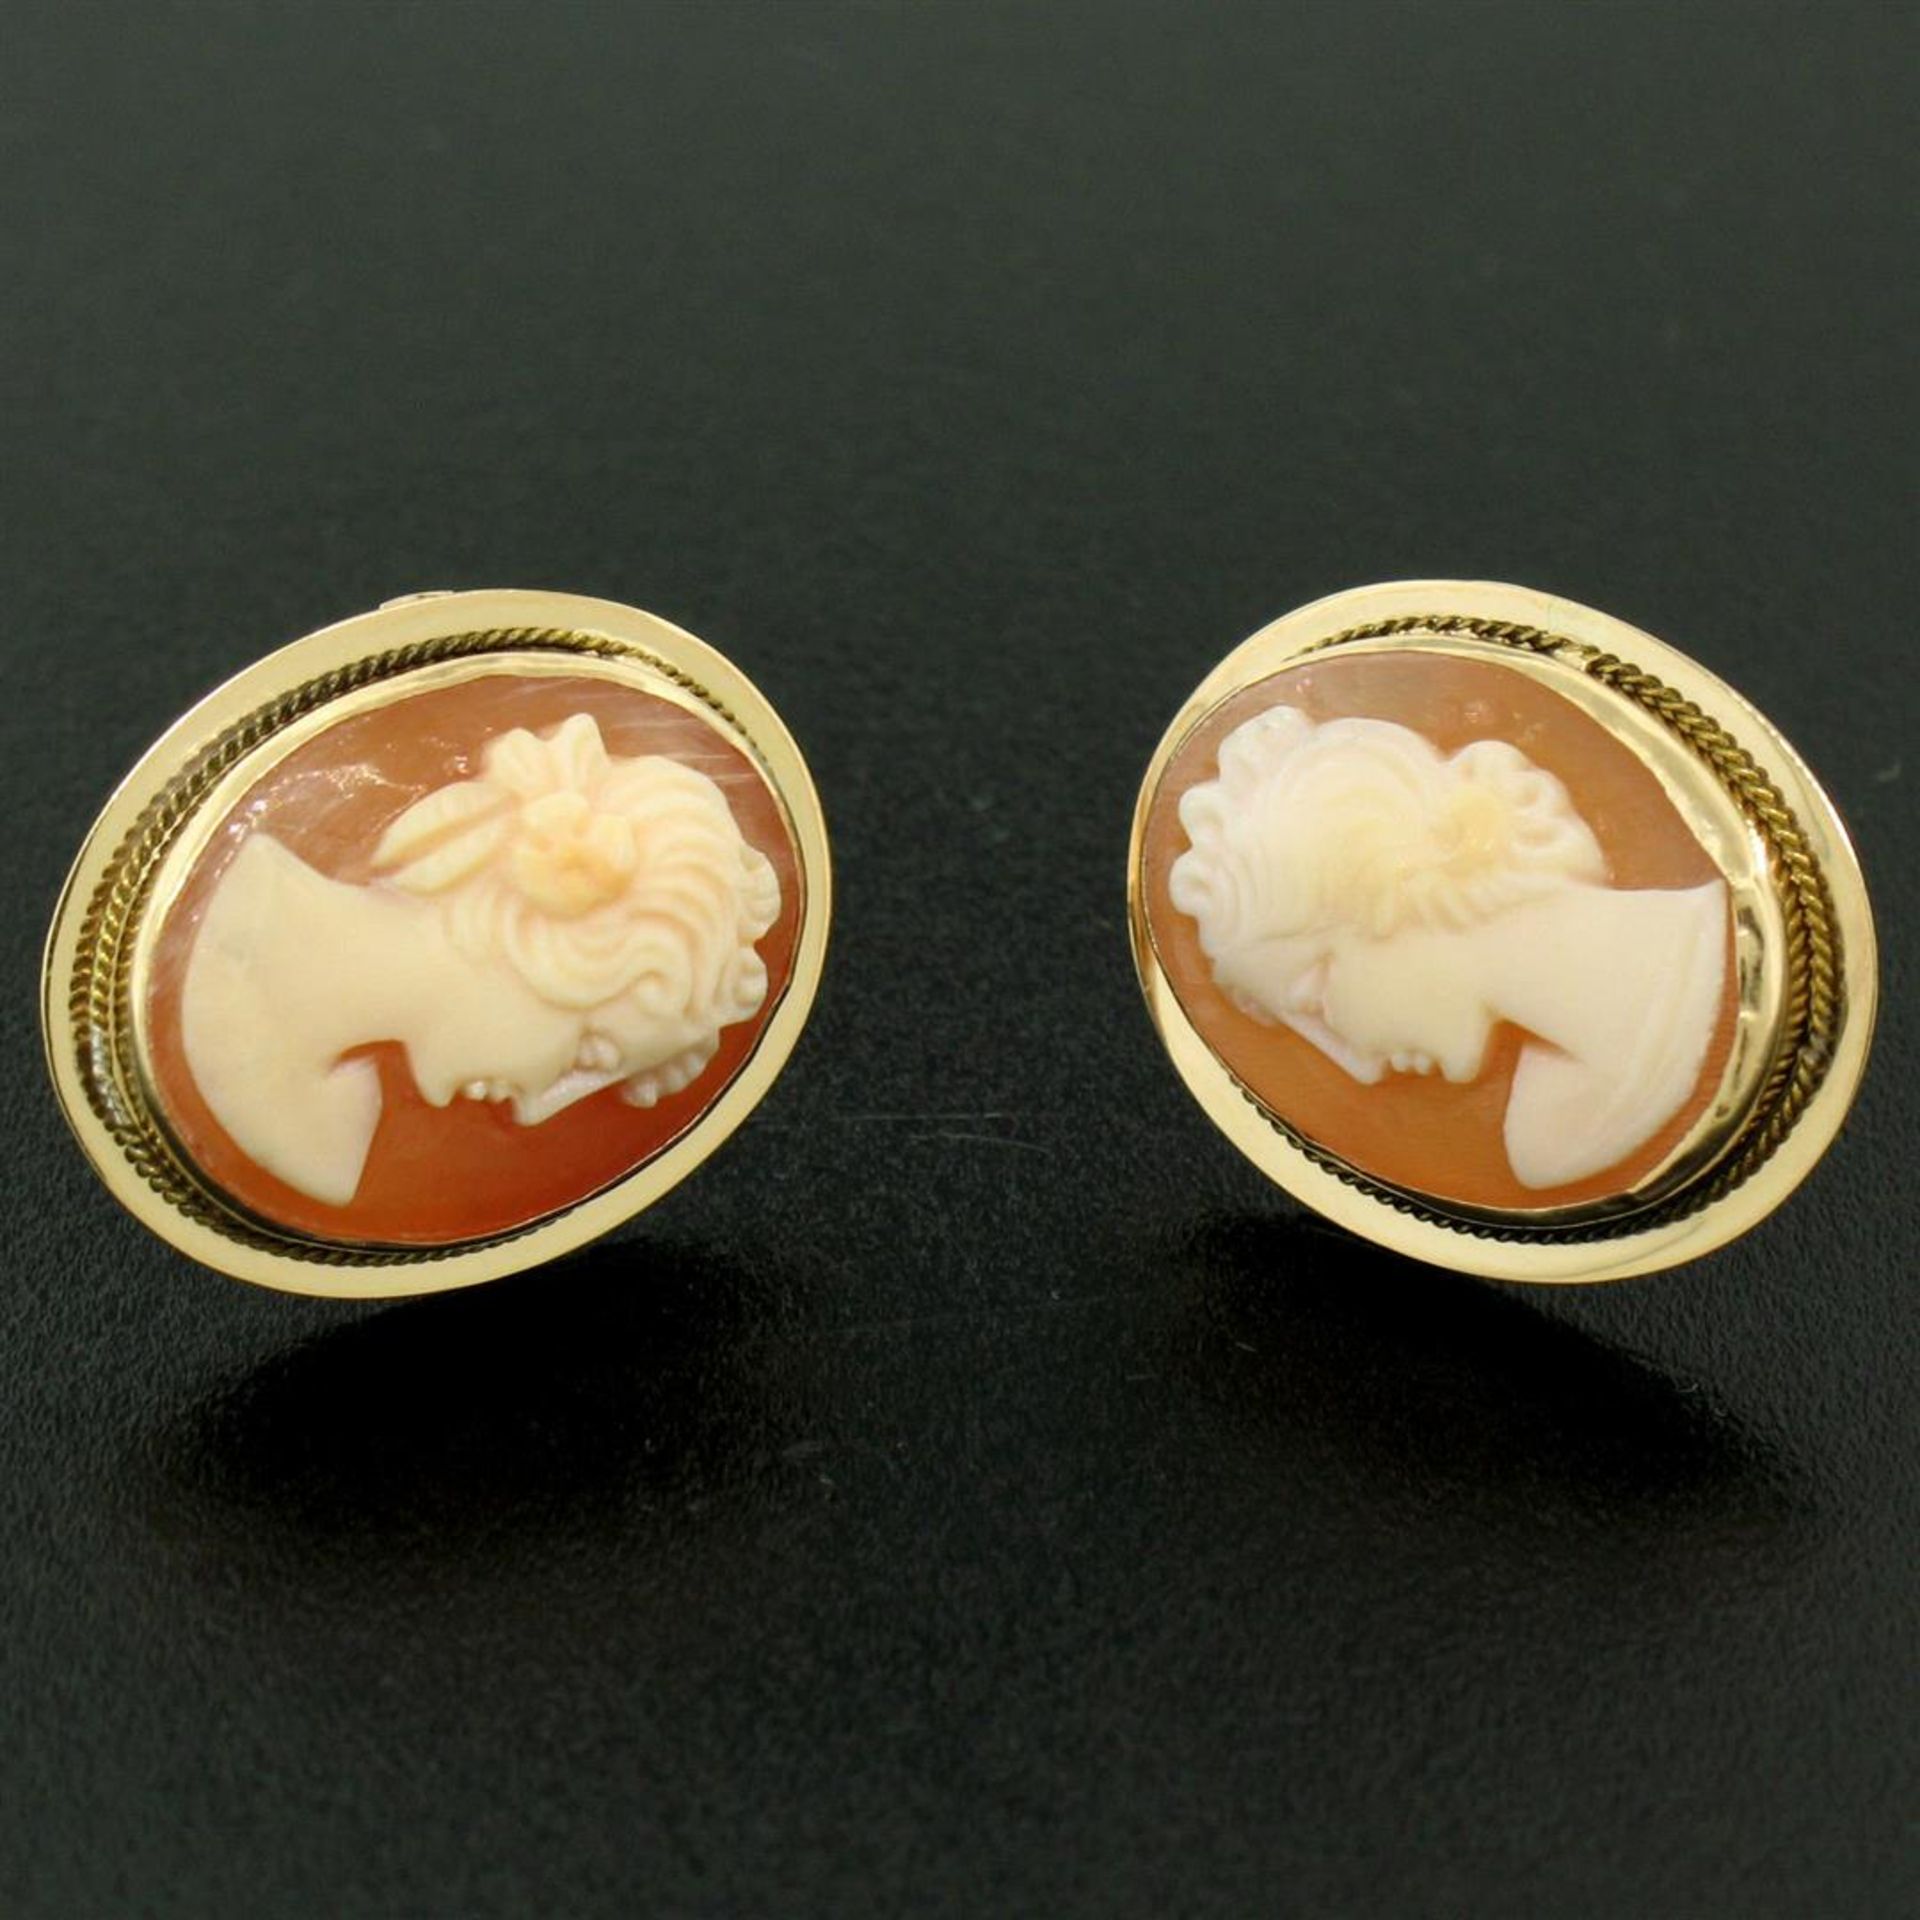 Vintage 14K Yellow Gold Oval Carved Shell Cameo Framed Screw Back Stud Earrings - Image 3 of 9